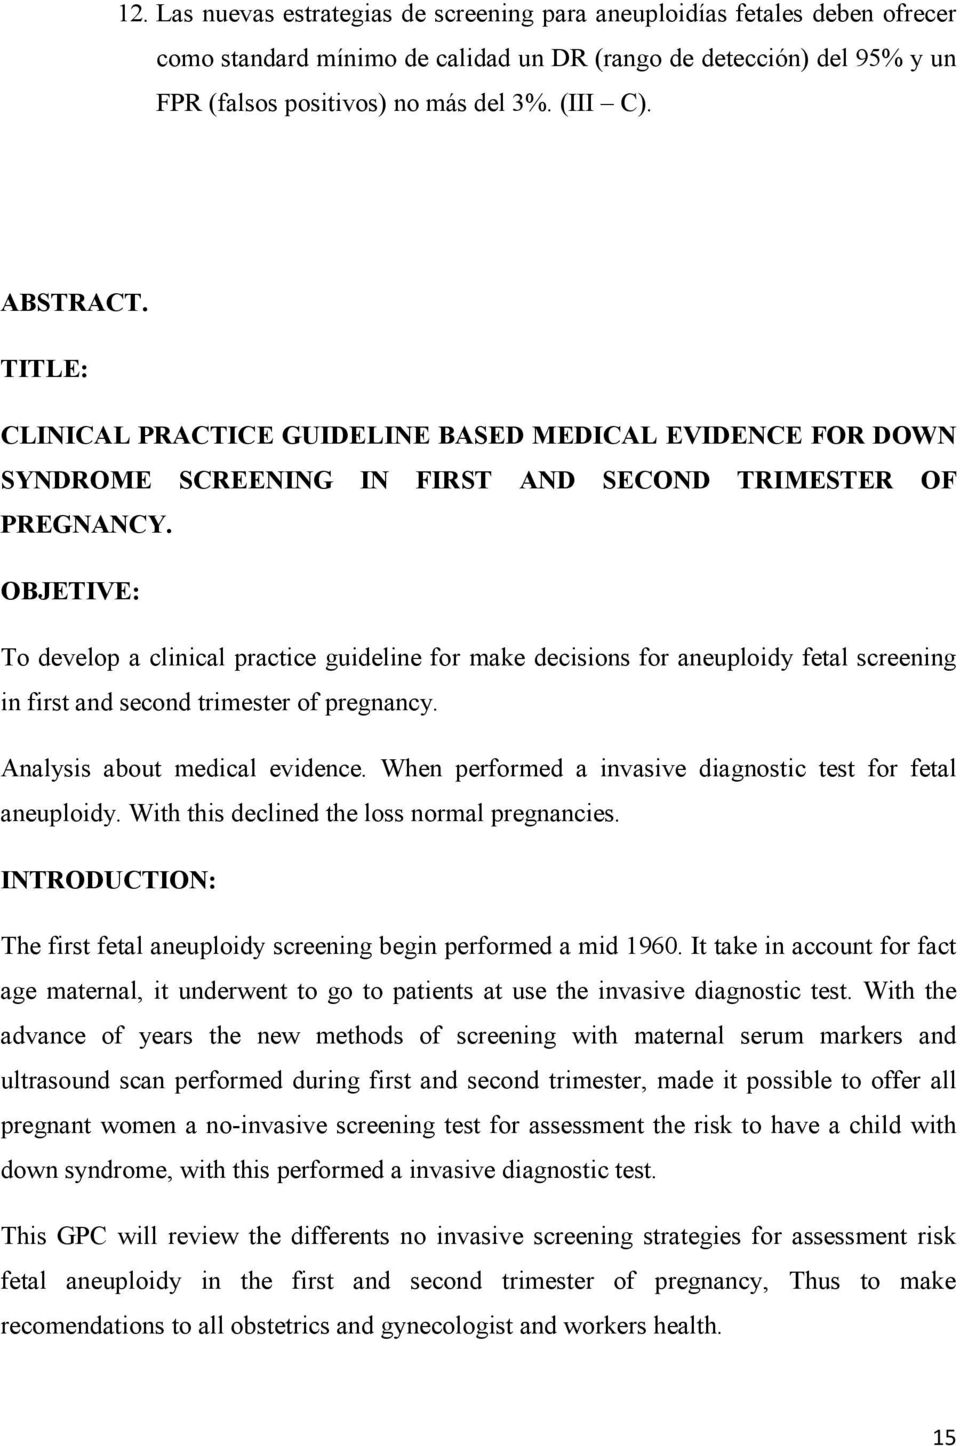 OBJETIVE: To develop a clinical practice guideline for make decisions for aneuploidy fetal screening in first and second trimester of pregnancy. Analysis about medical evidence.